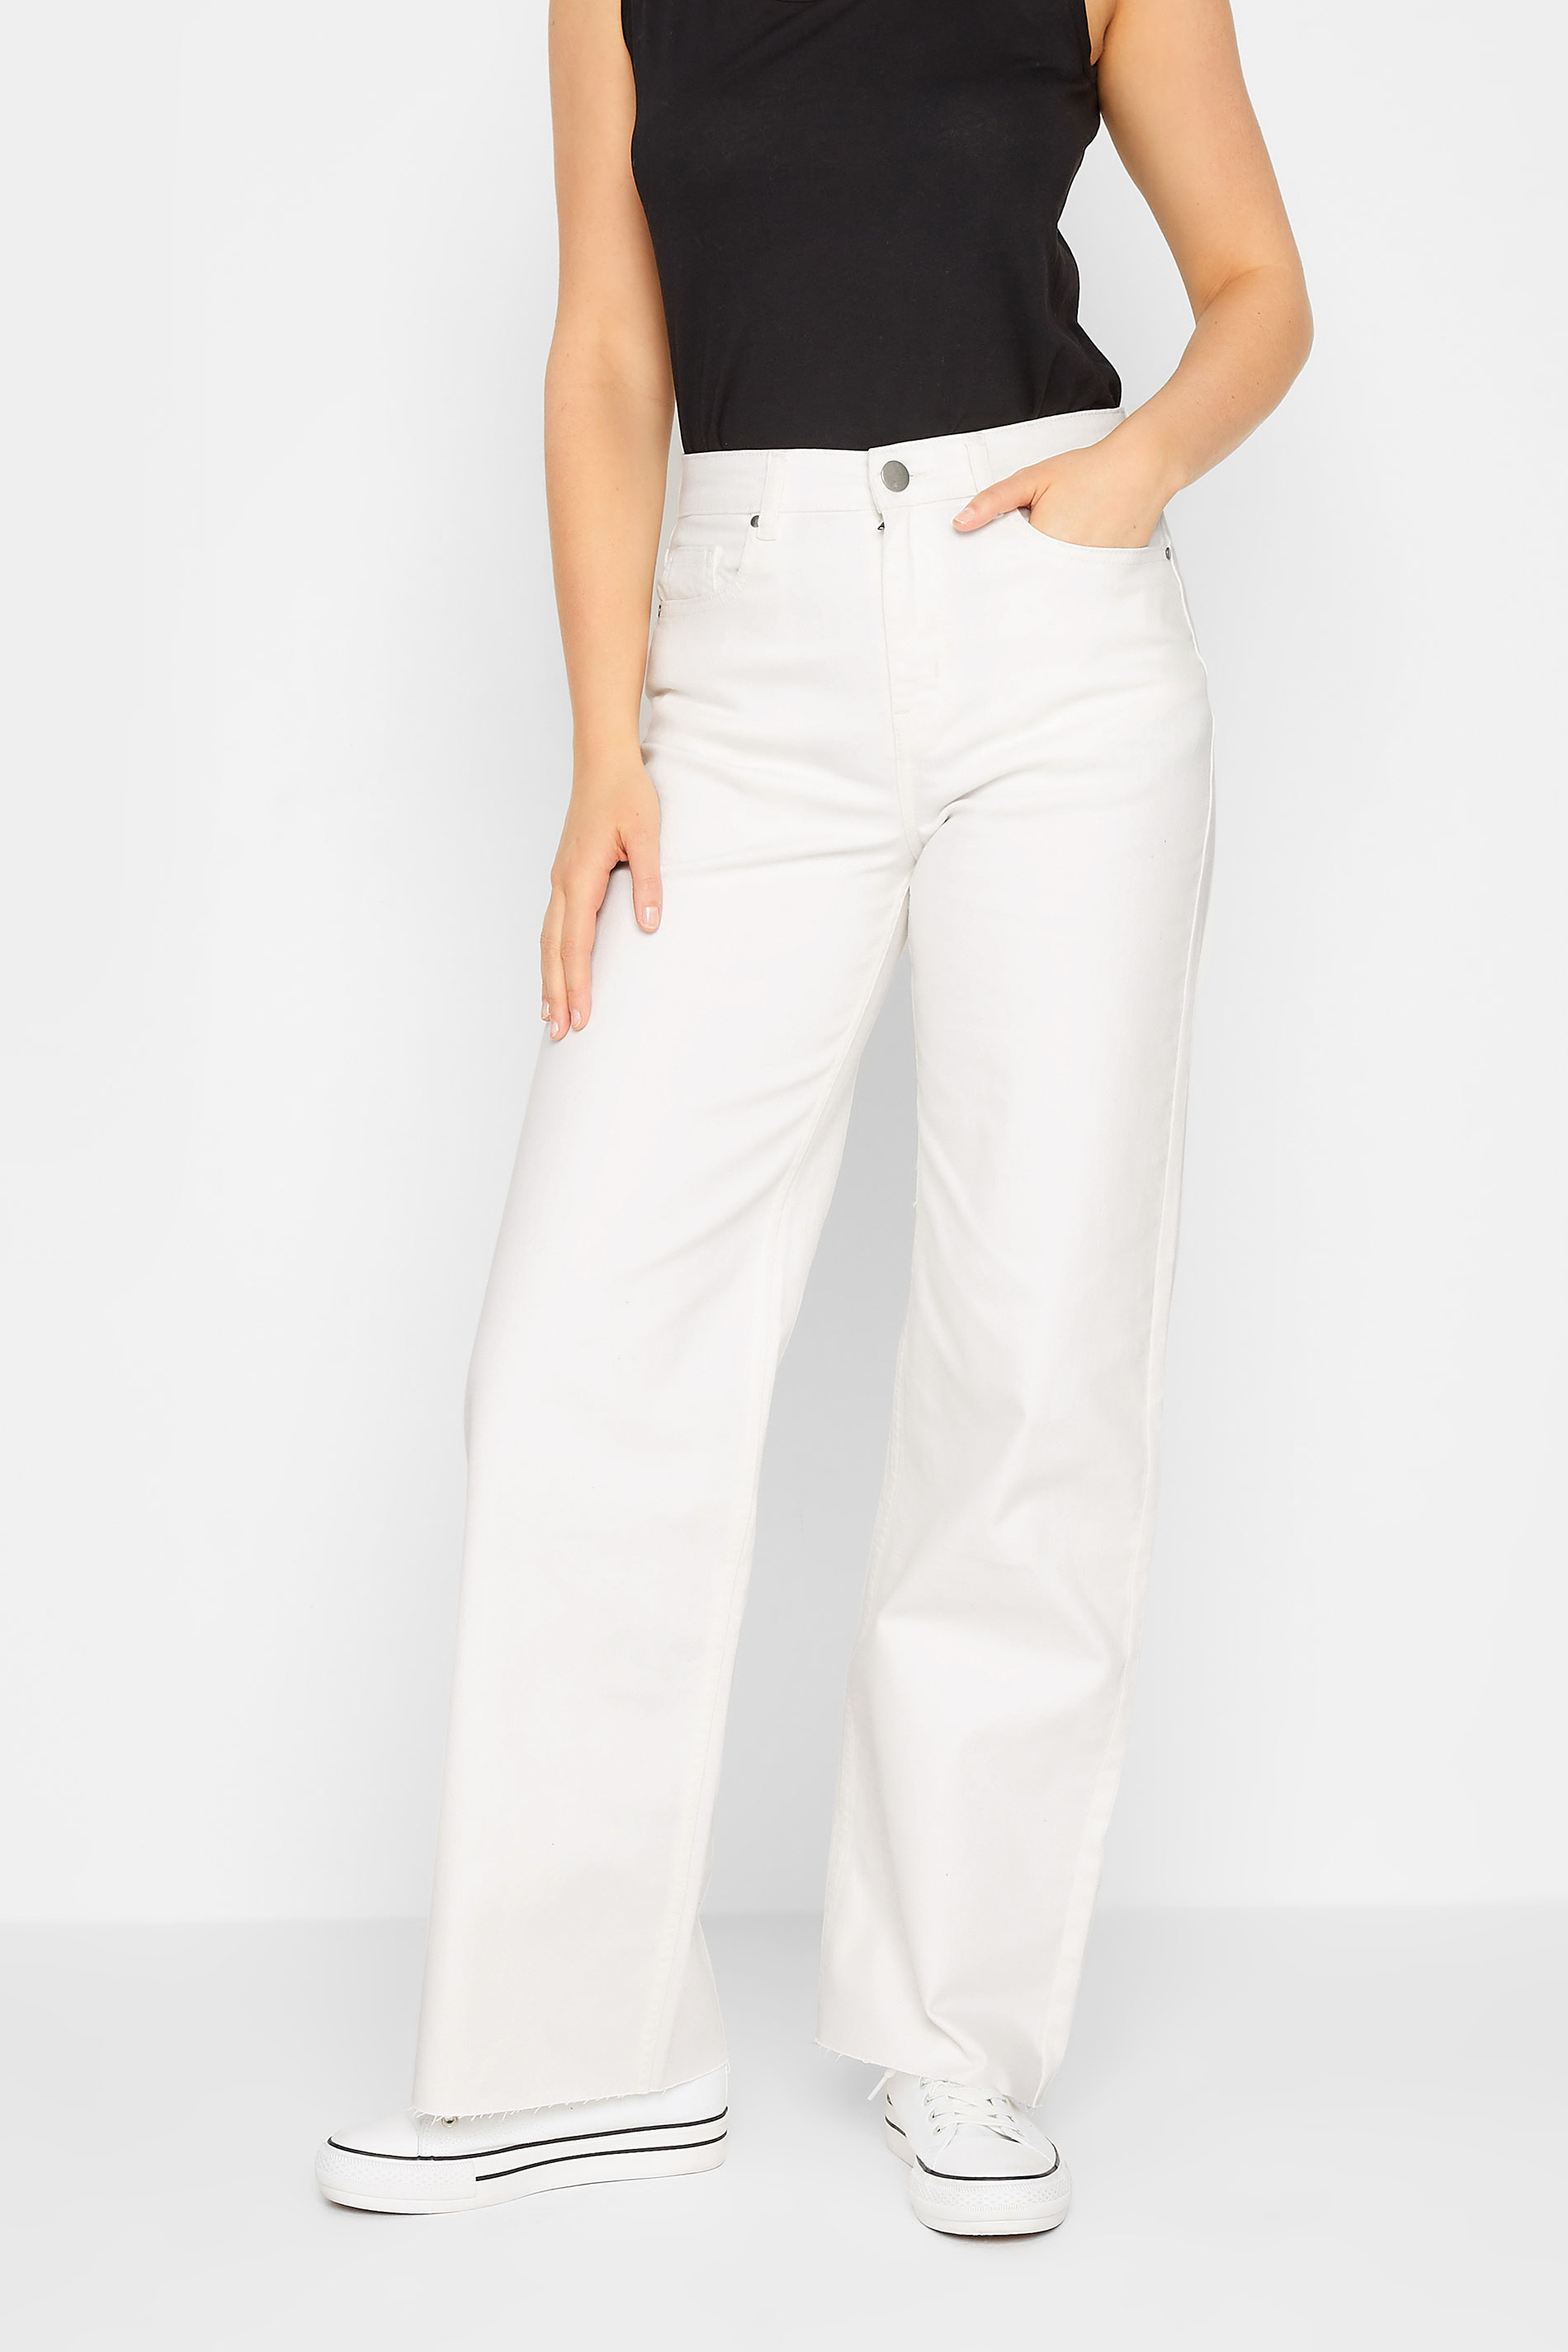 LTS Tall Women's White Stretch Wide Leg Jeans | Long Tall Sally 1